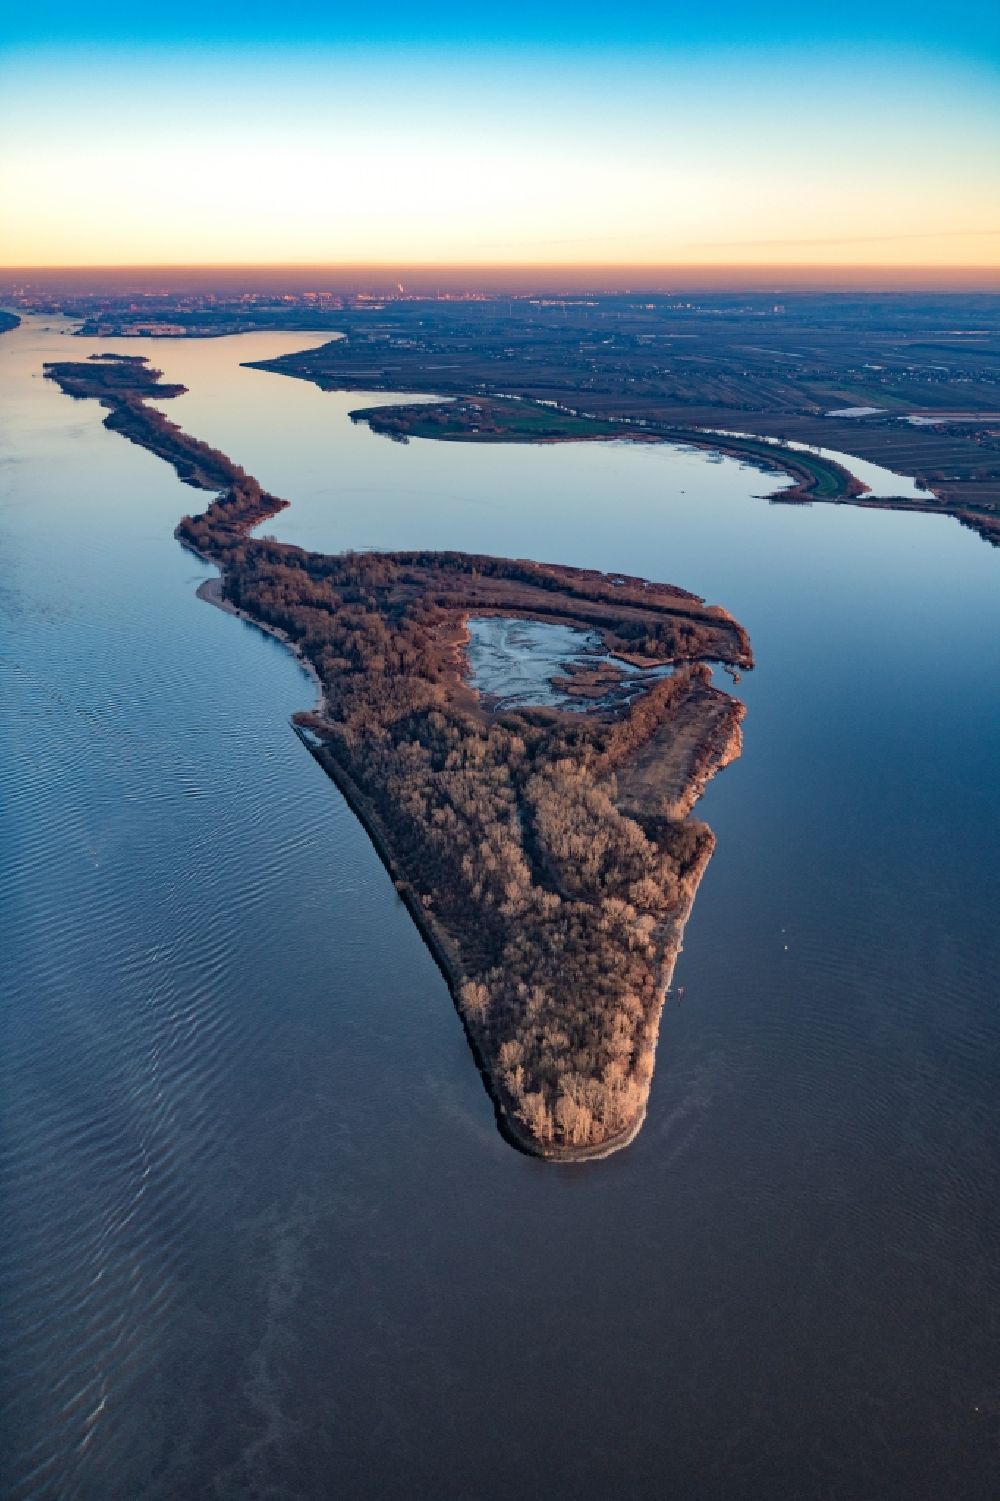 Aerial photograph Wedel - Sunrise over the landscape of the Elbe island along the Elbe river in the district Wedel in Hamburg, Germany